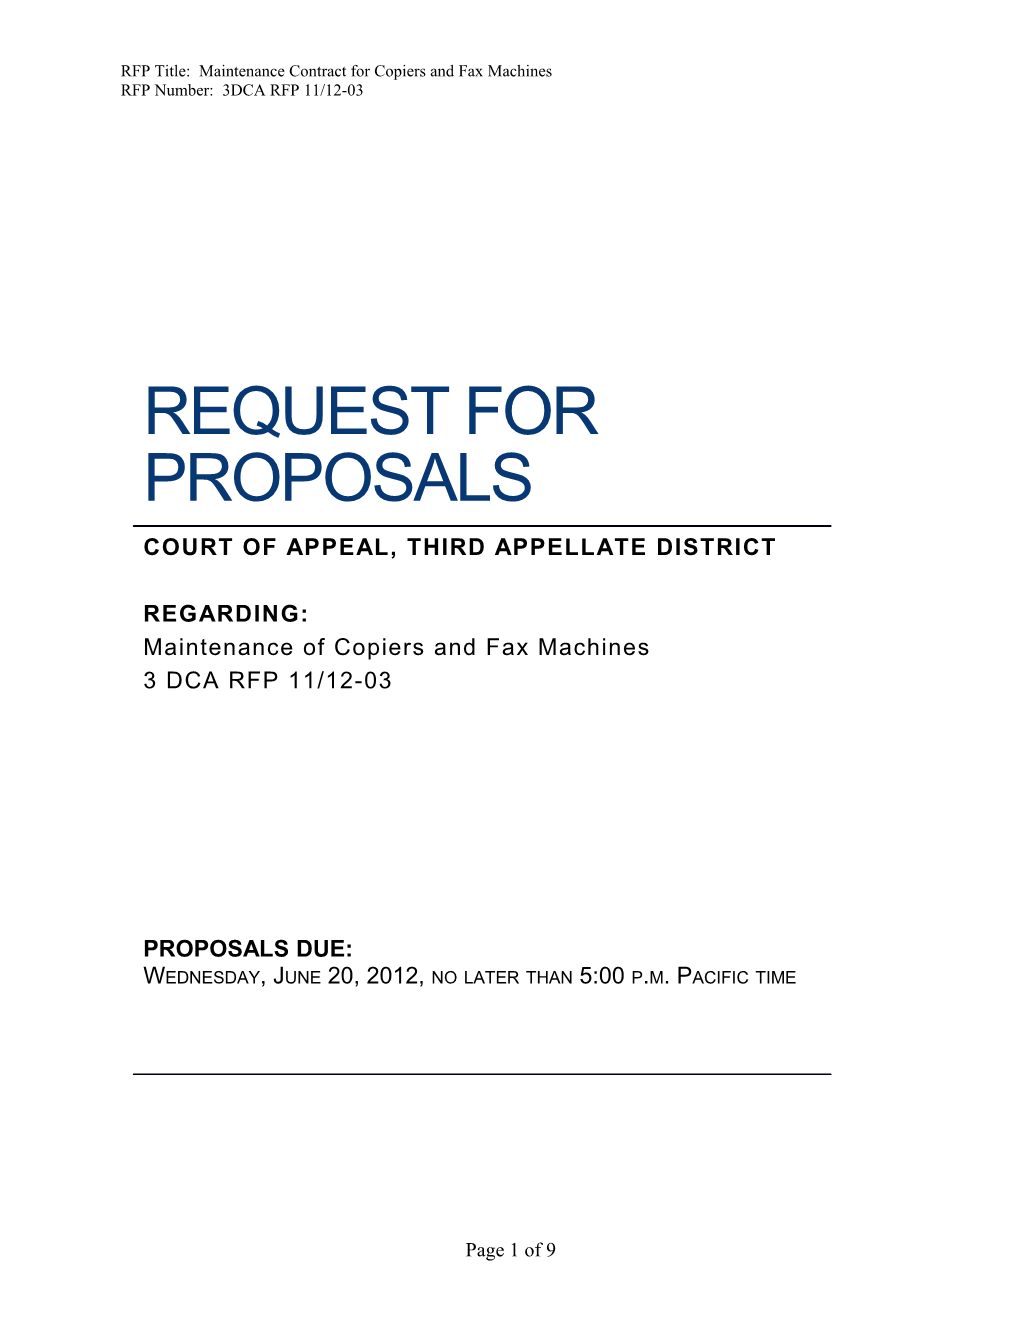 RFP Title: Maintenance Contract for Copiers and Fax Machines